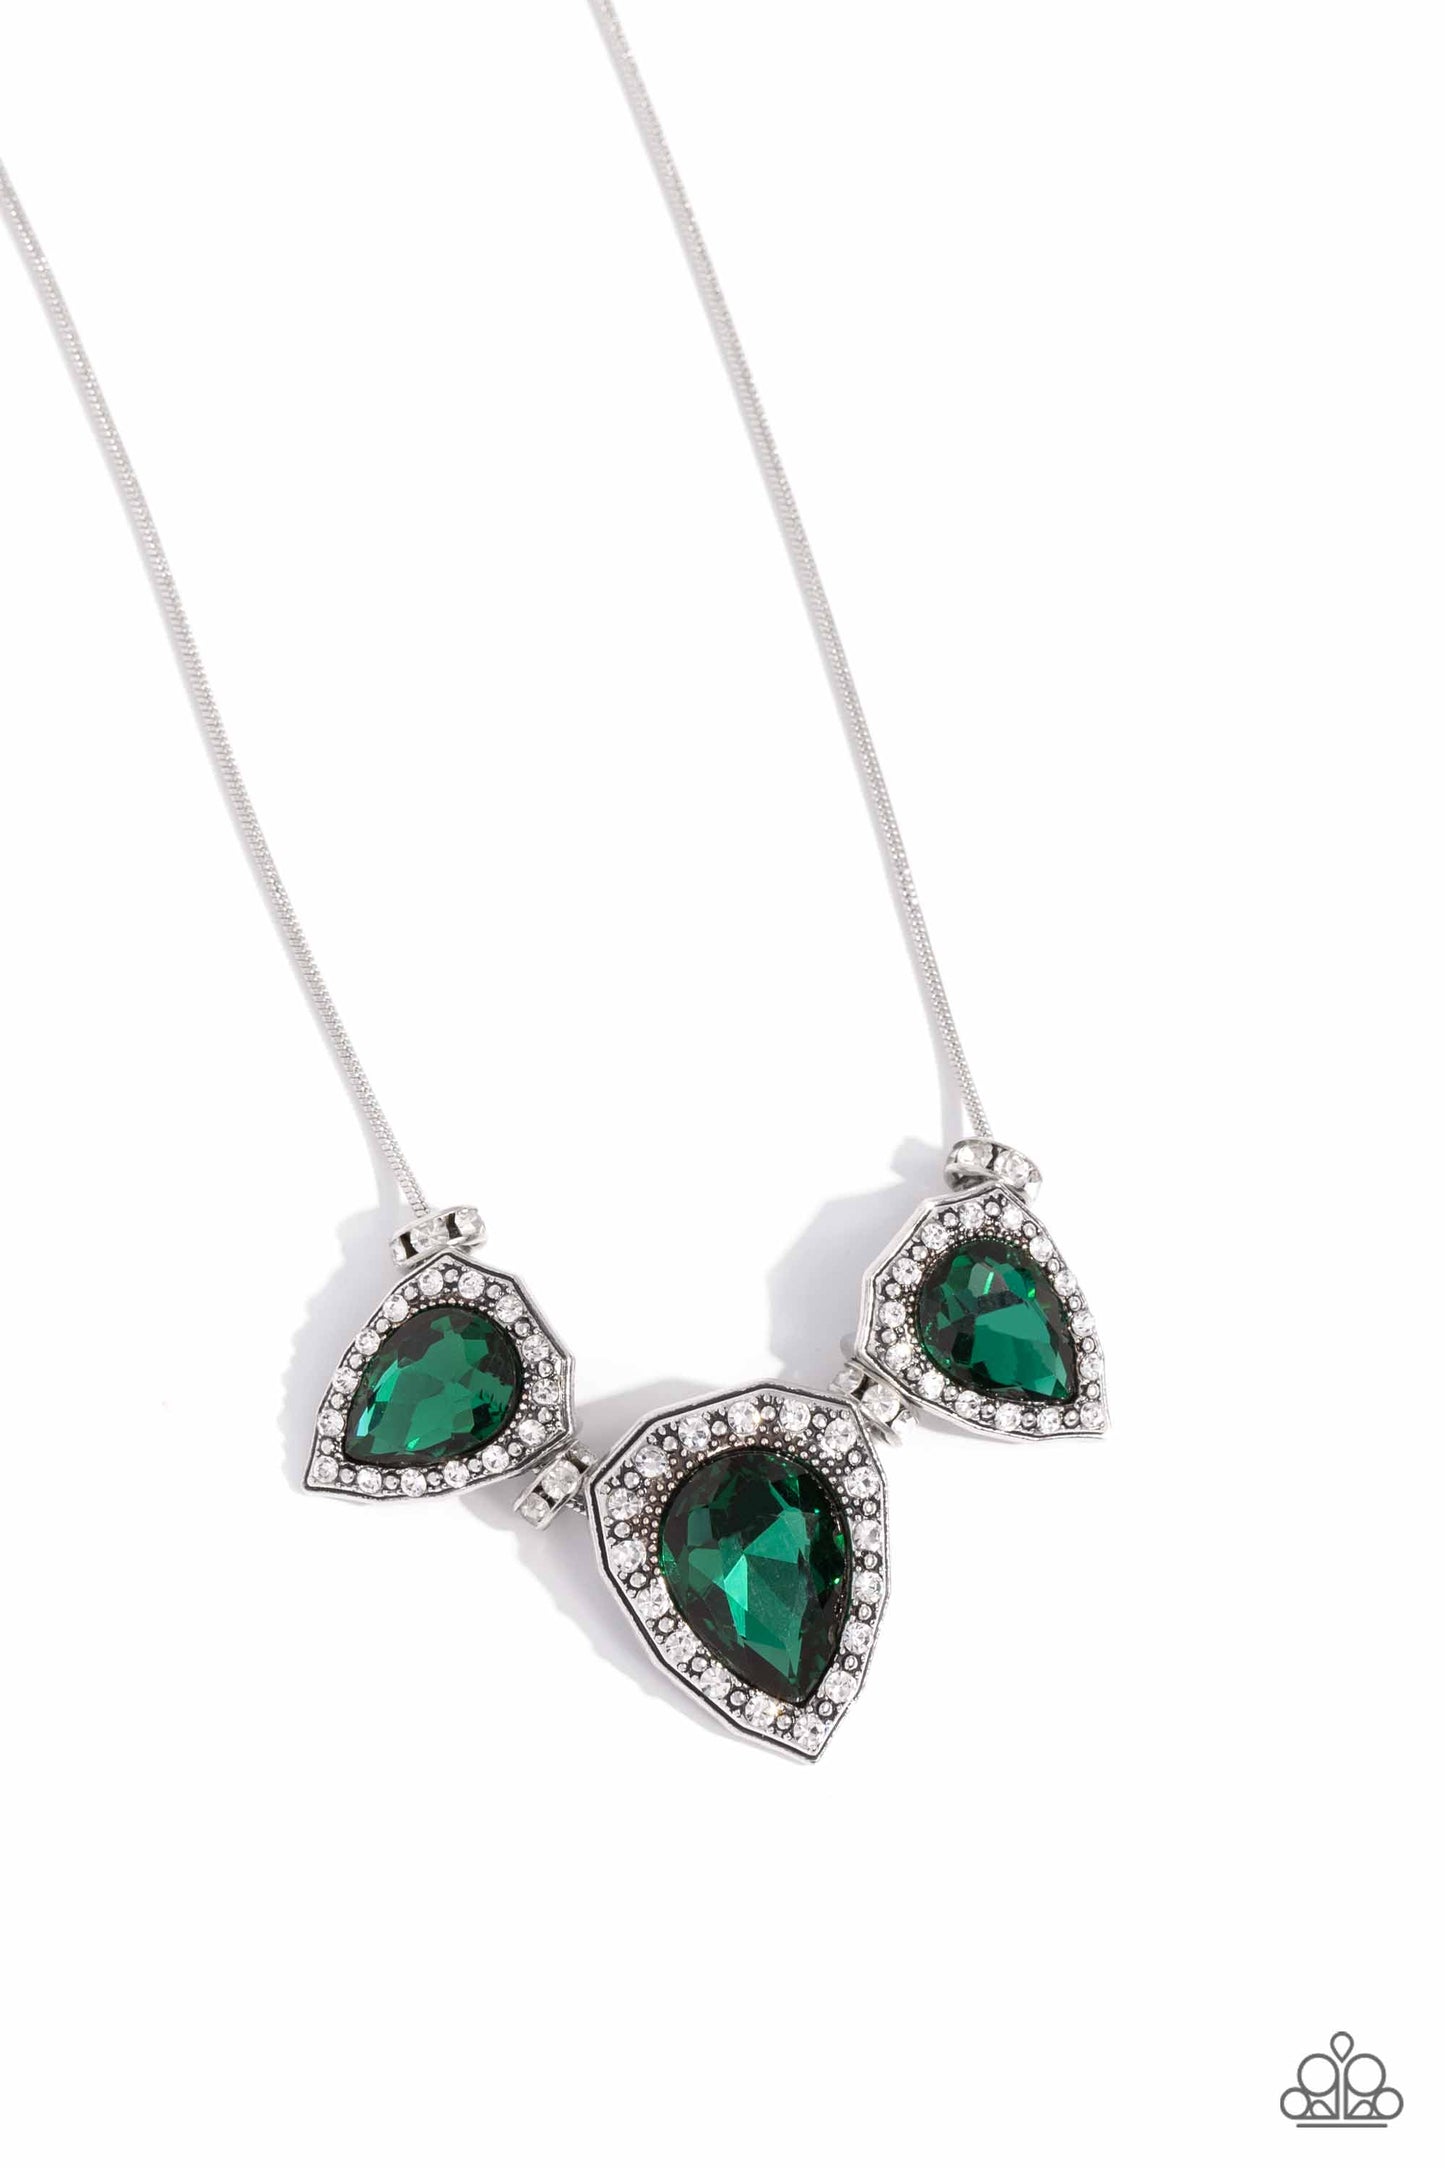 Paparazzi Majestic Met Ball - Green Necklace